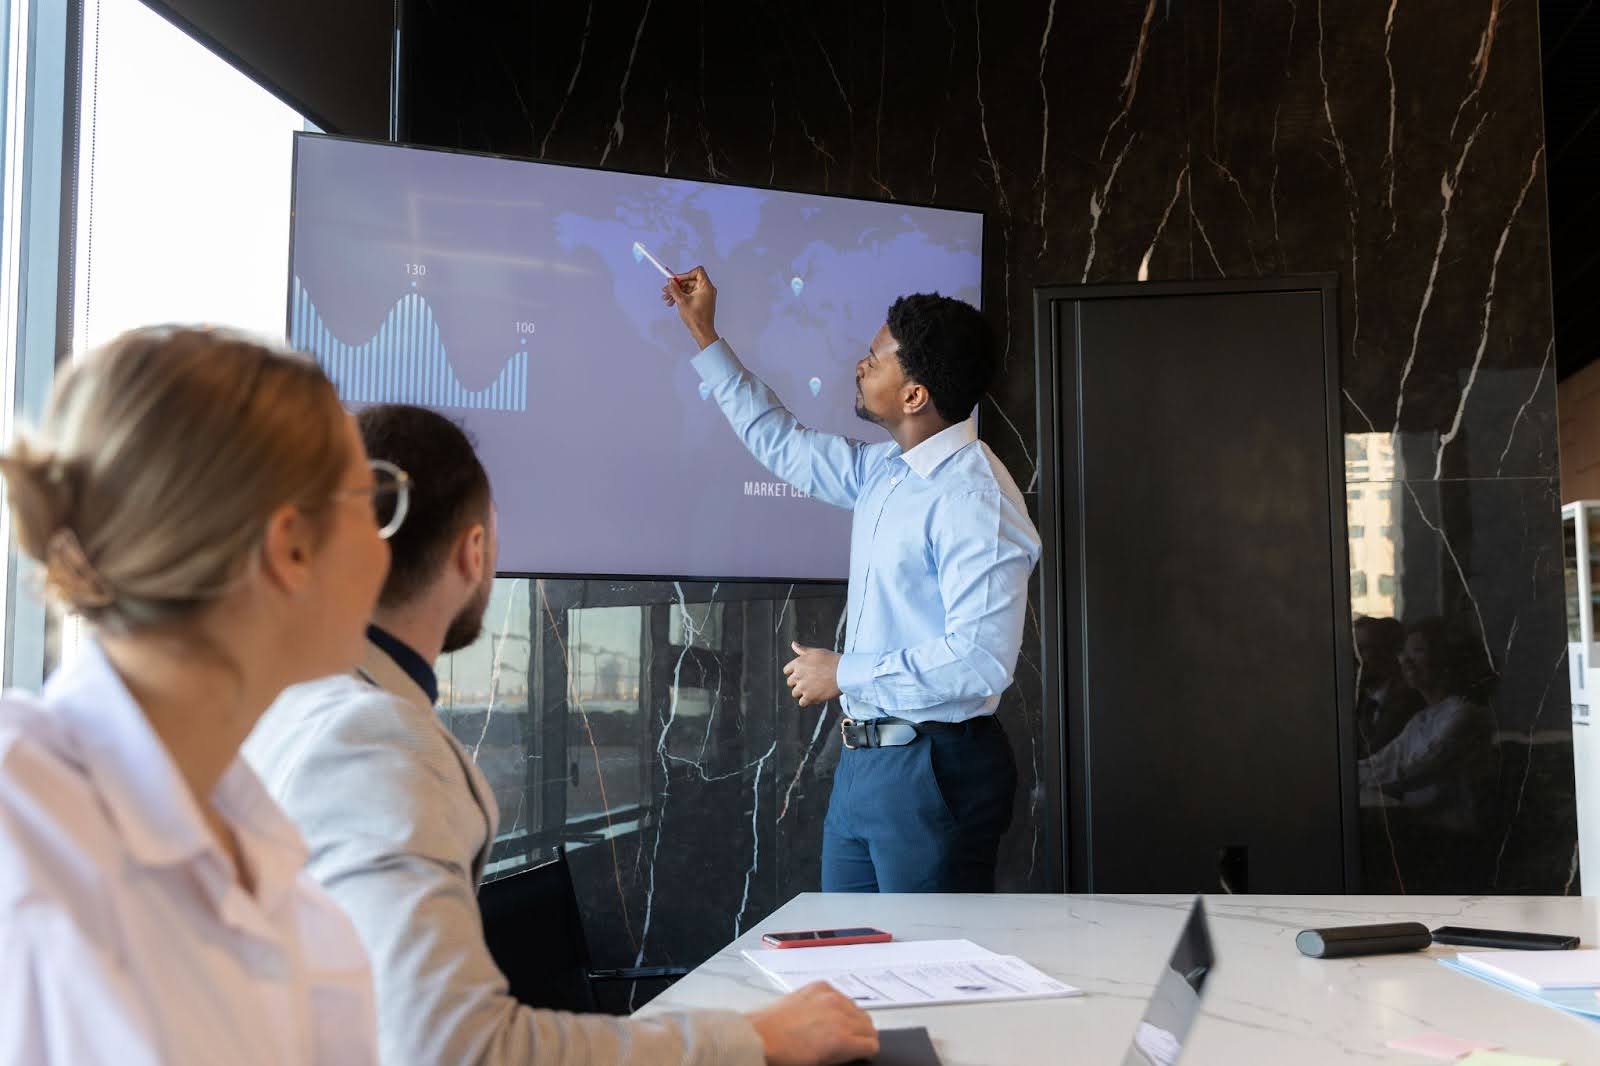 The Benefits of Portable Projectors For Business Presentations